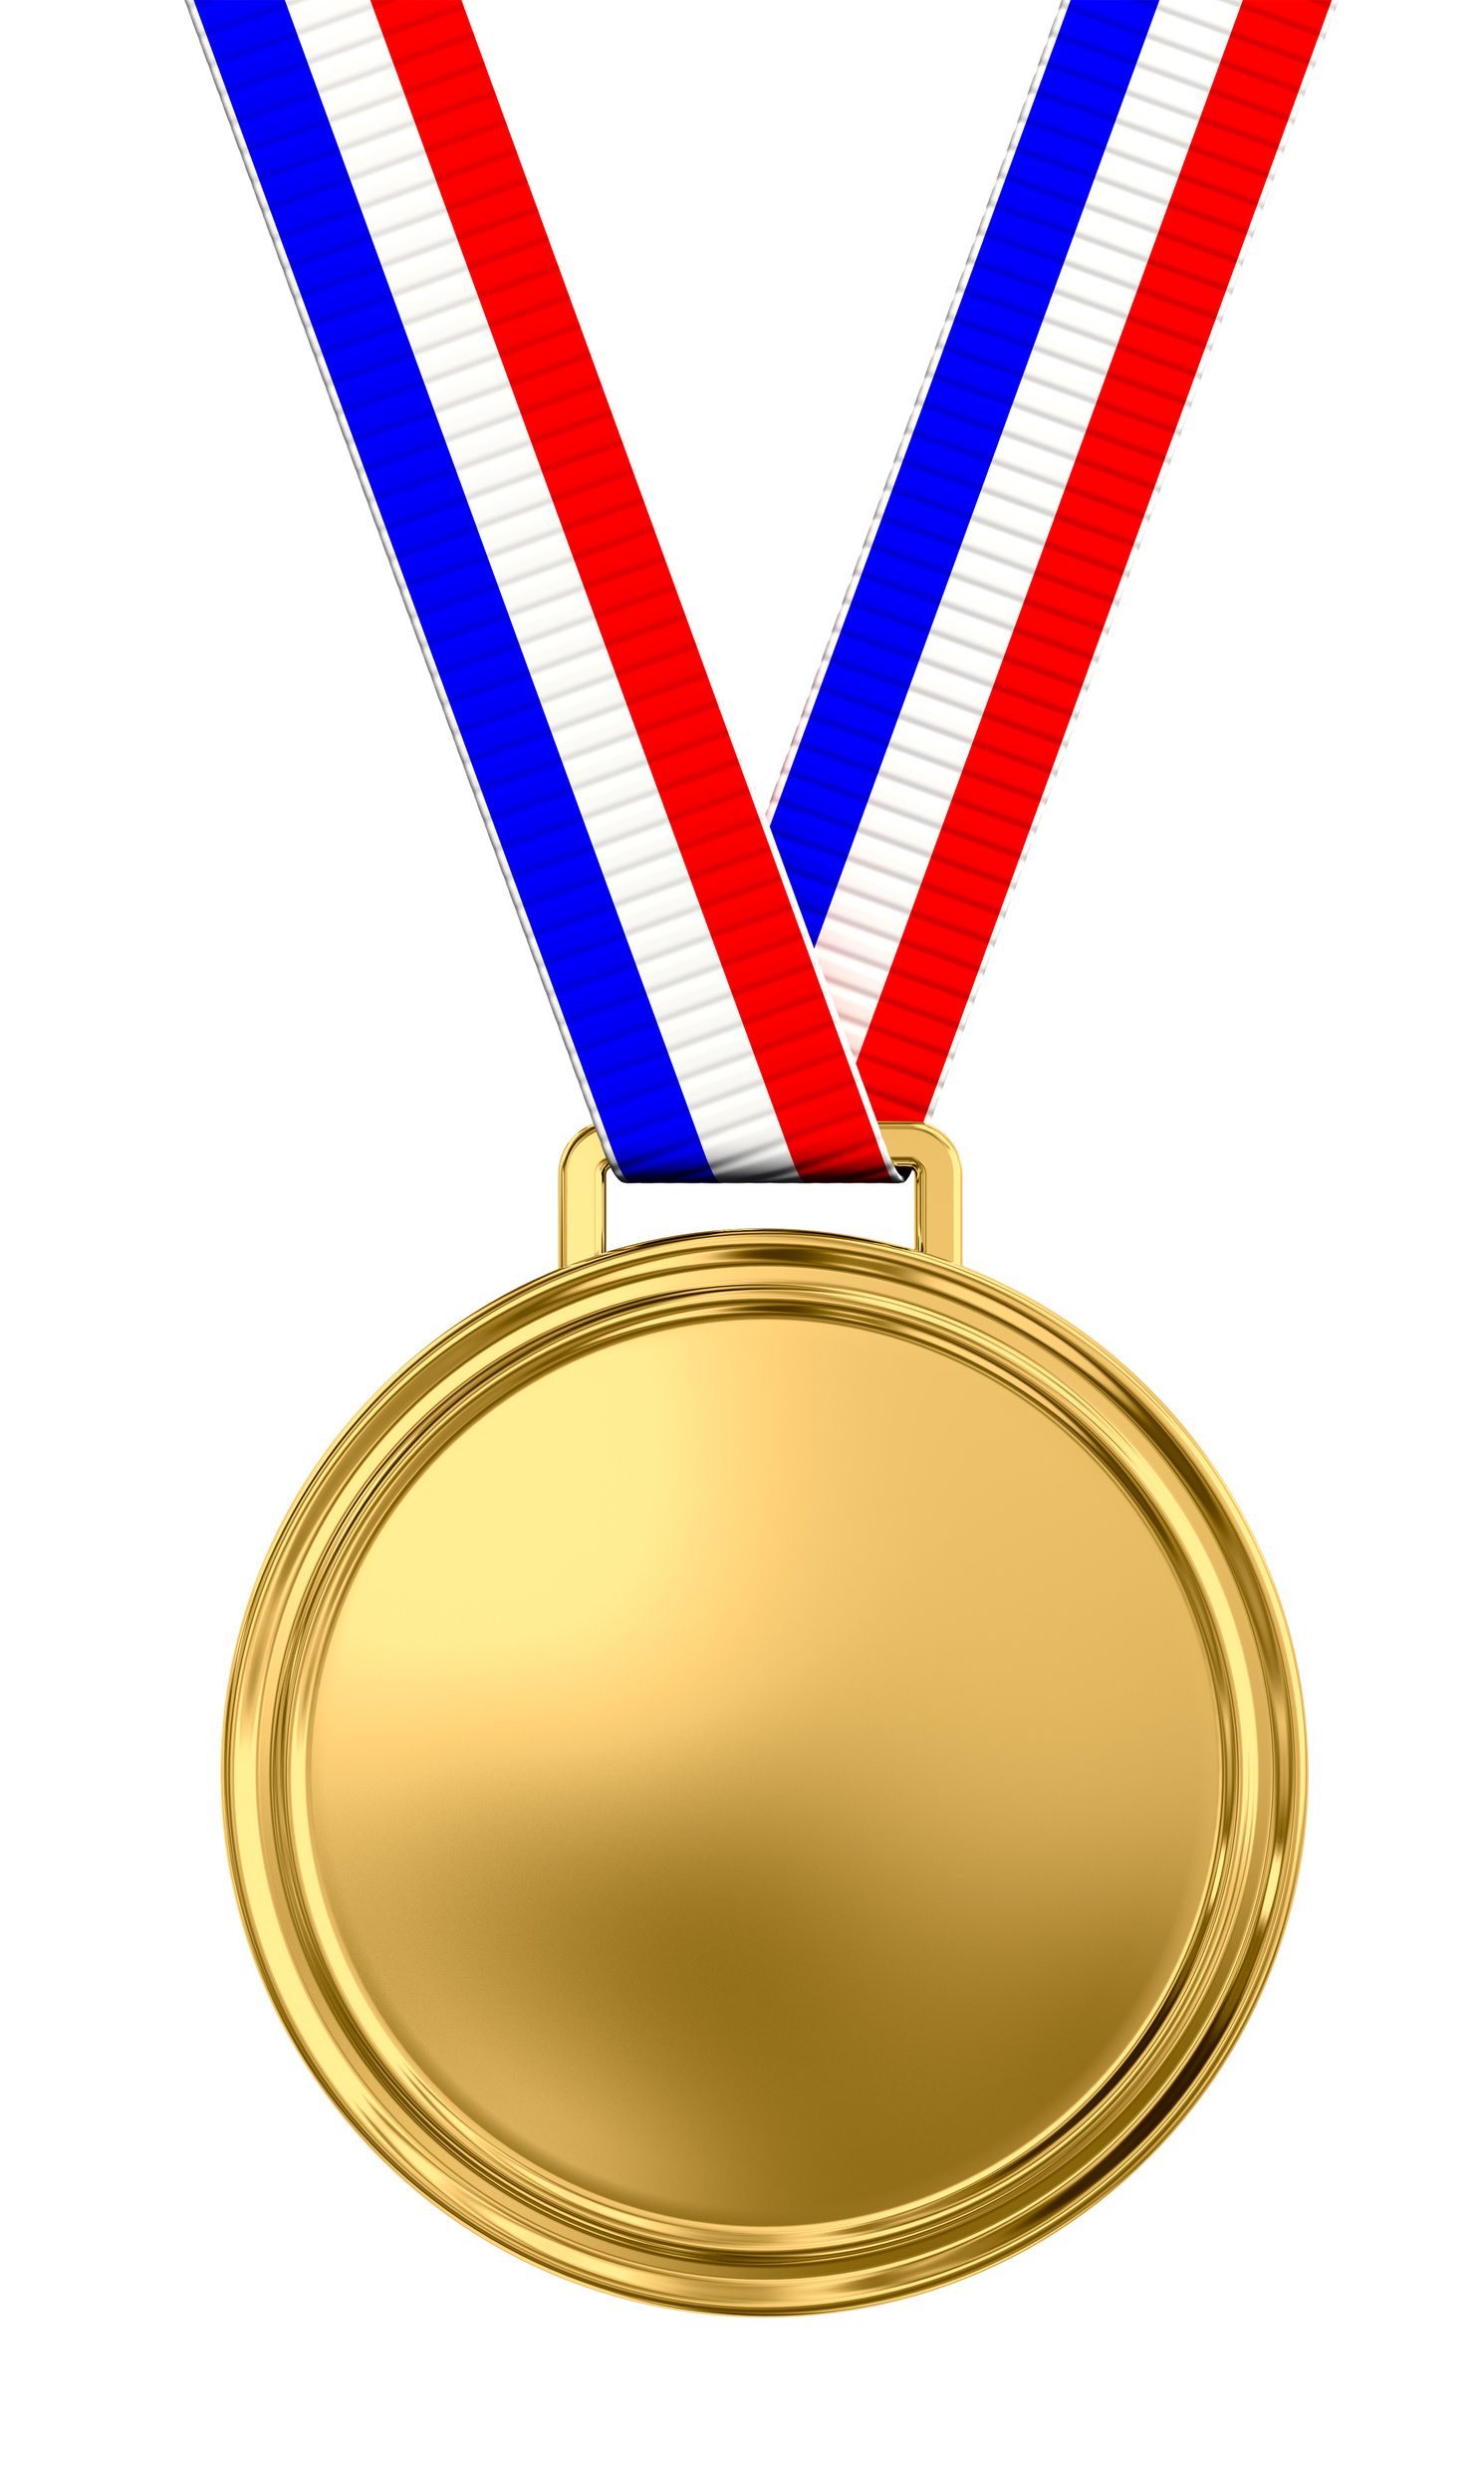 Medal cliparts